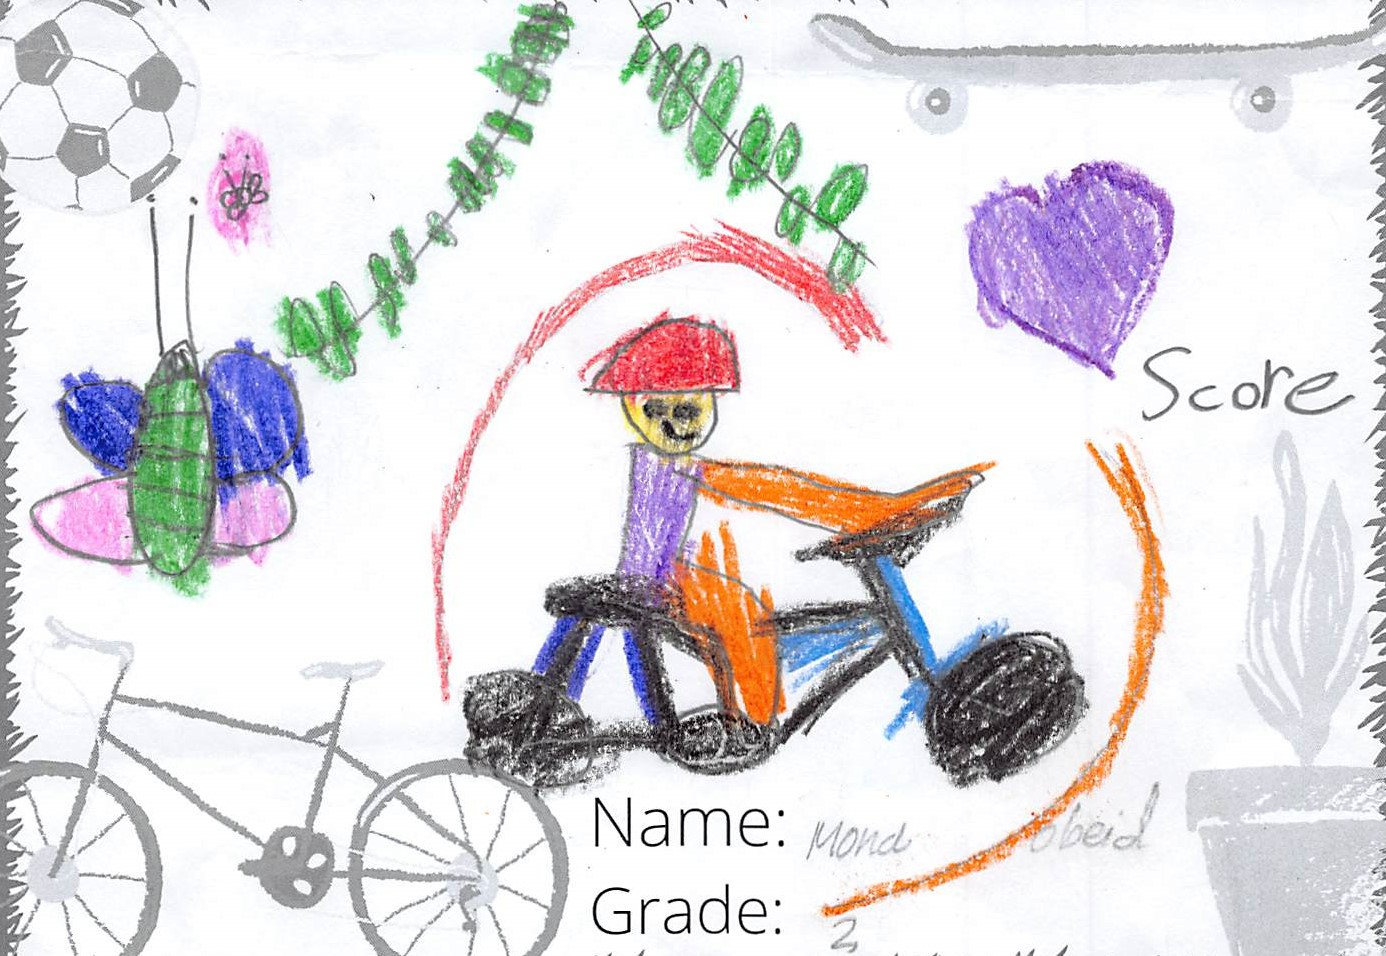 Pencil crayon drawing for the SCORE! logo contest. The drawing includes a kid riding a bike.